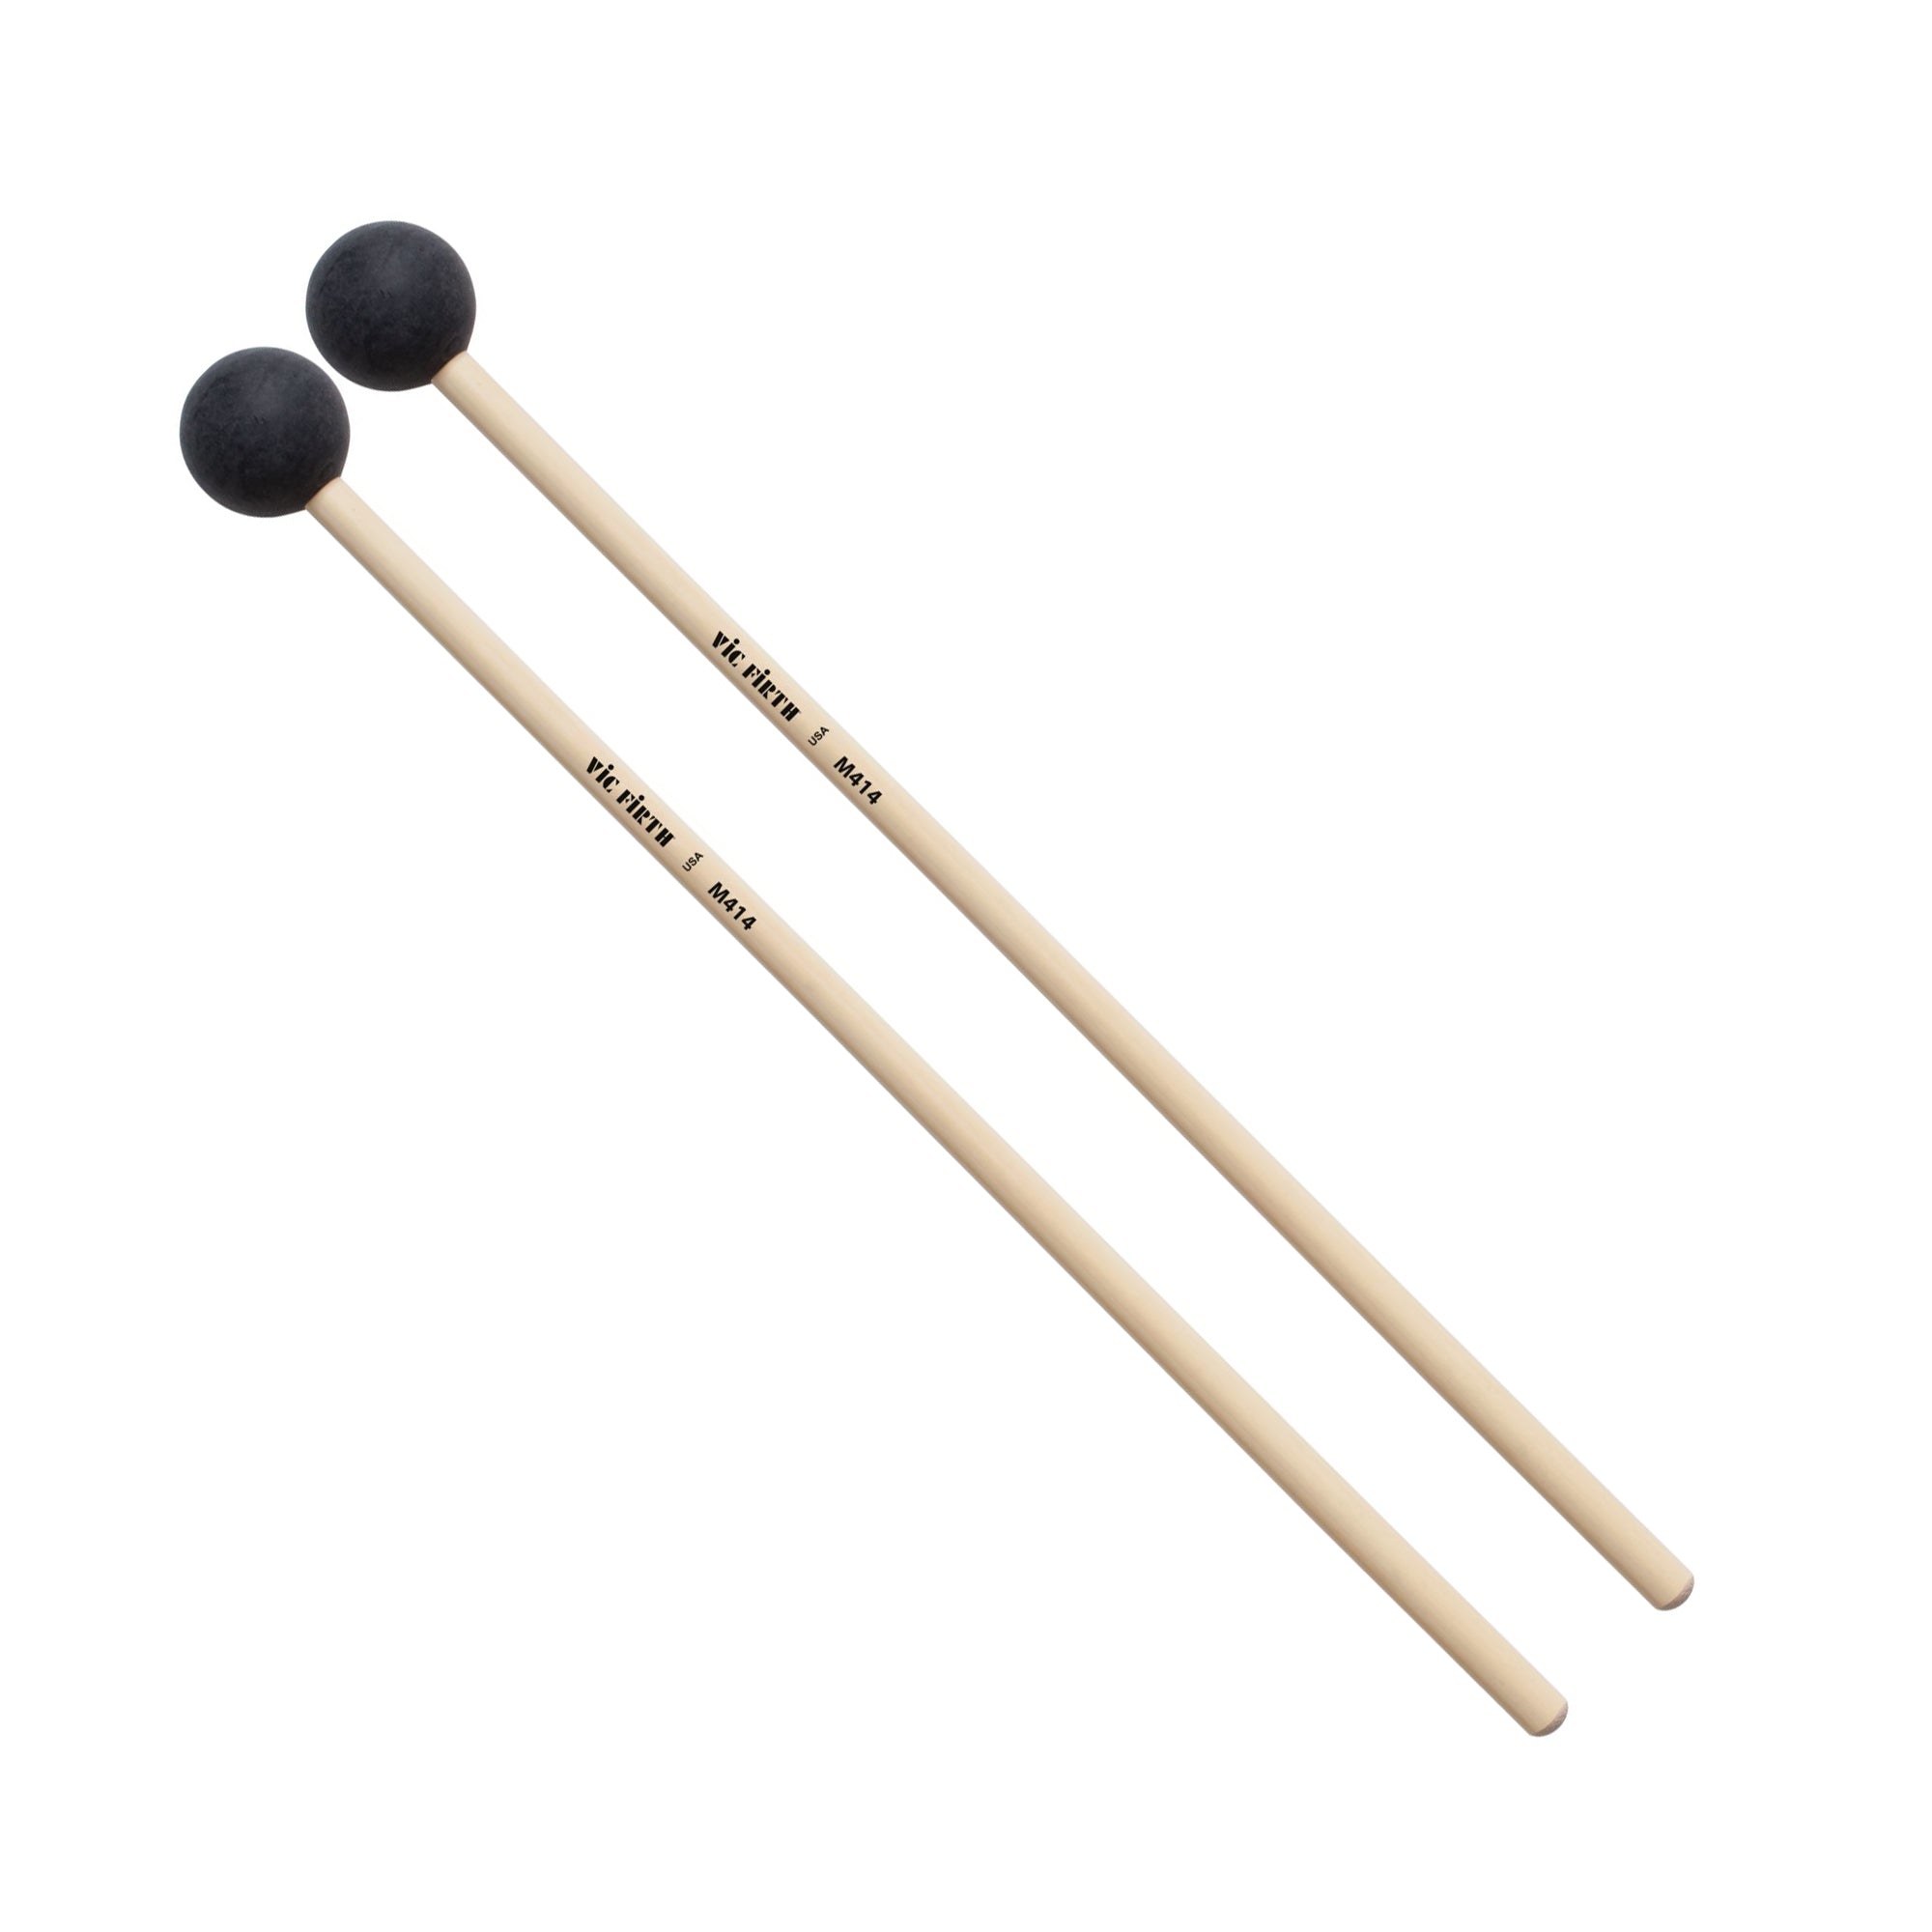 Vic Firth Soundpower Bass Drum Mallets Rollers (Pair)(並行輸入